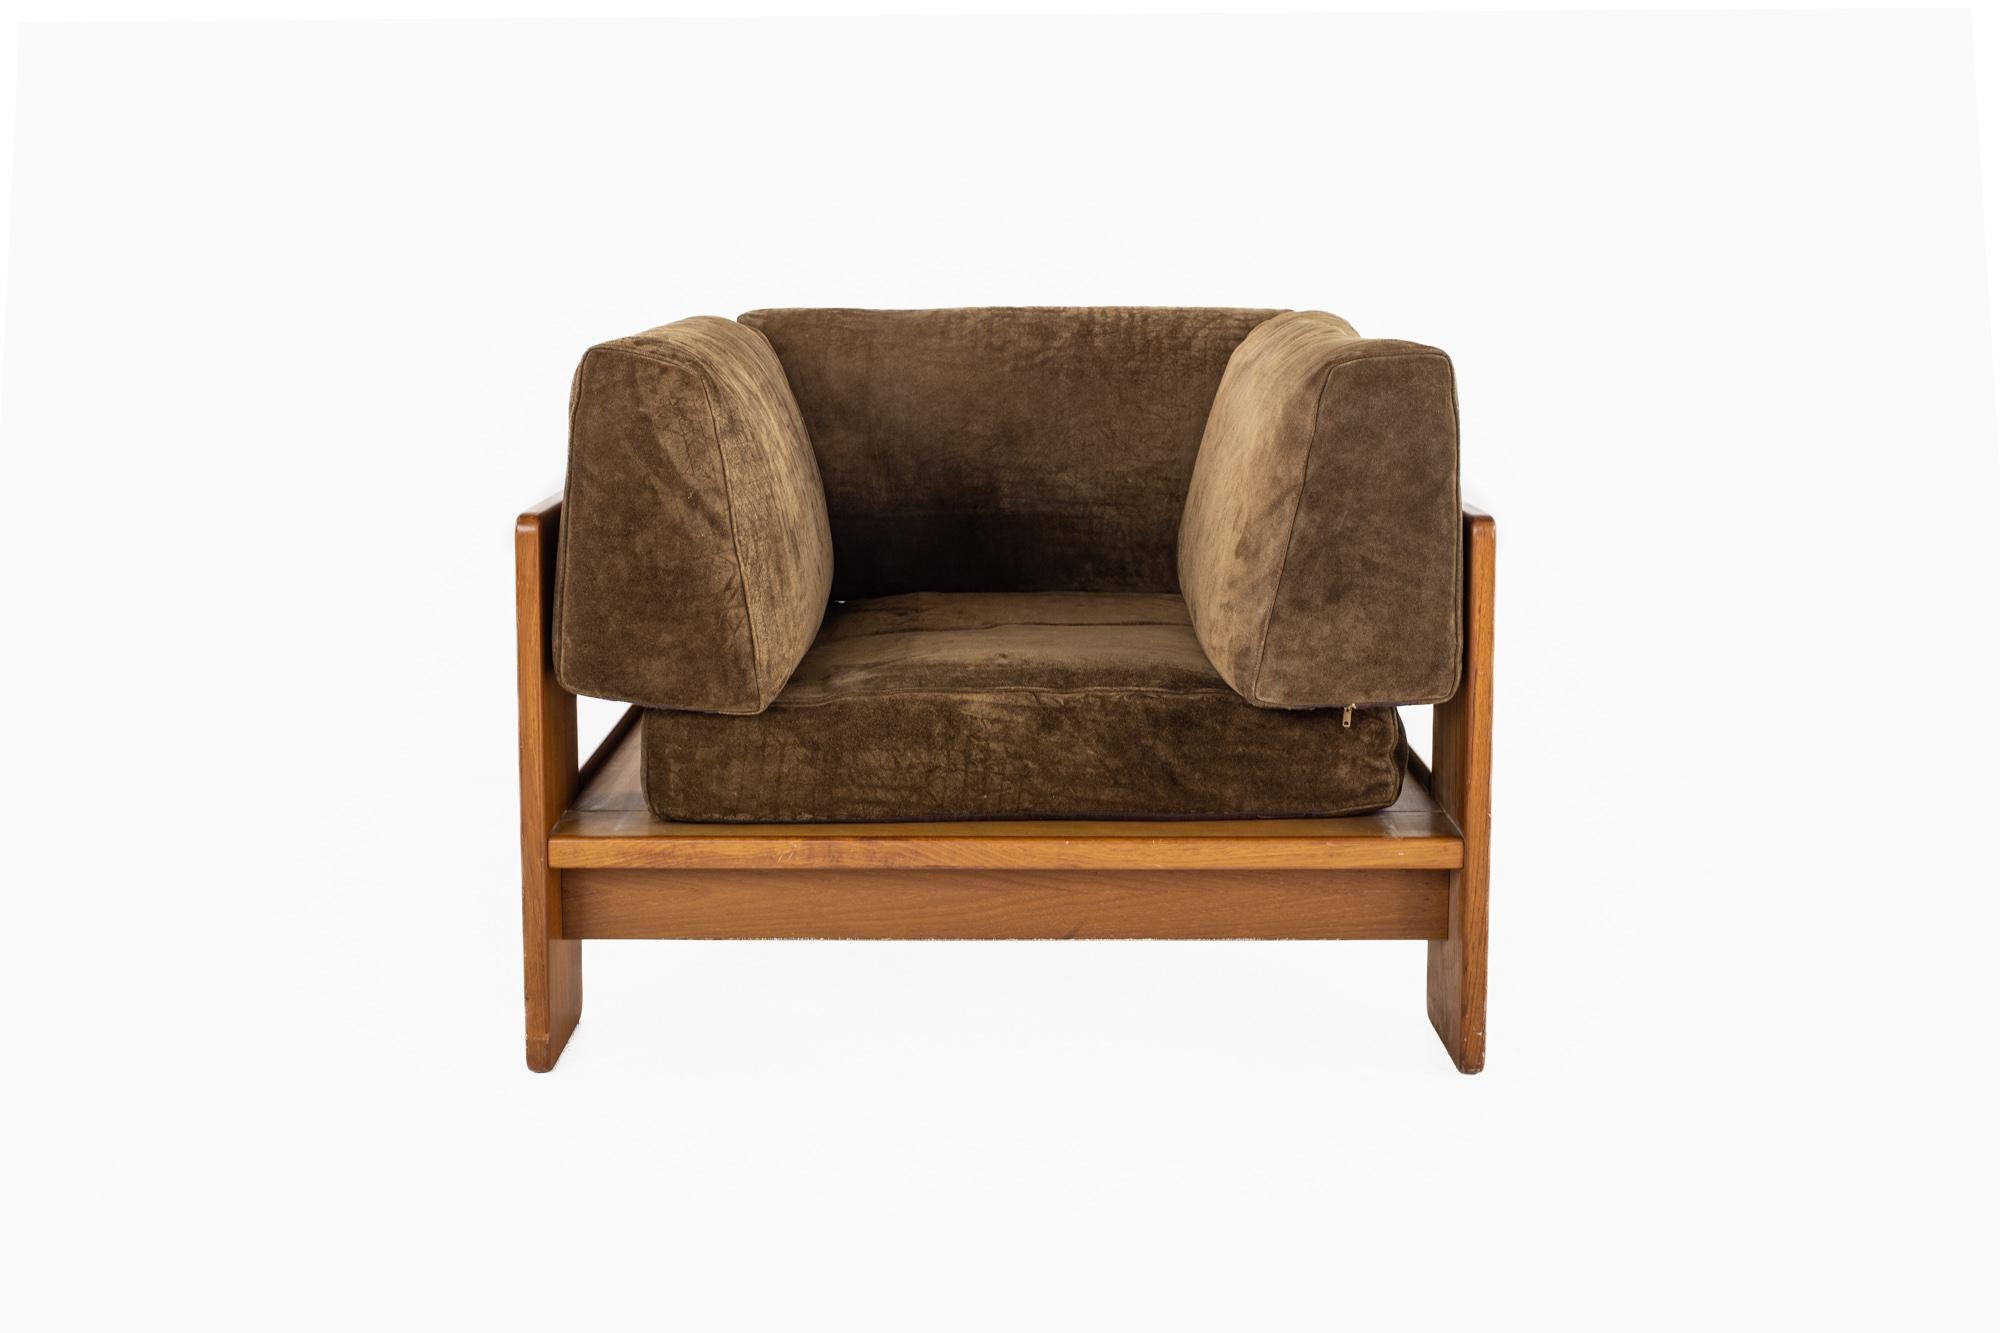 Tobia Scarpa Mid Century Lounge Chair

The chair measures: 35 wide x 22 deep x 29 high, with a seat height of 16 inches

All pieces of furniture can be had in what we call restored vintage condition. That means the piece is restored upon